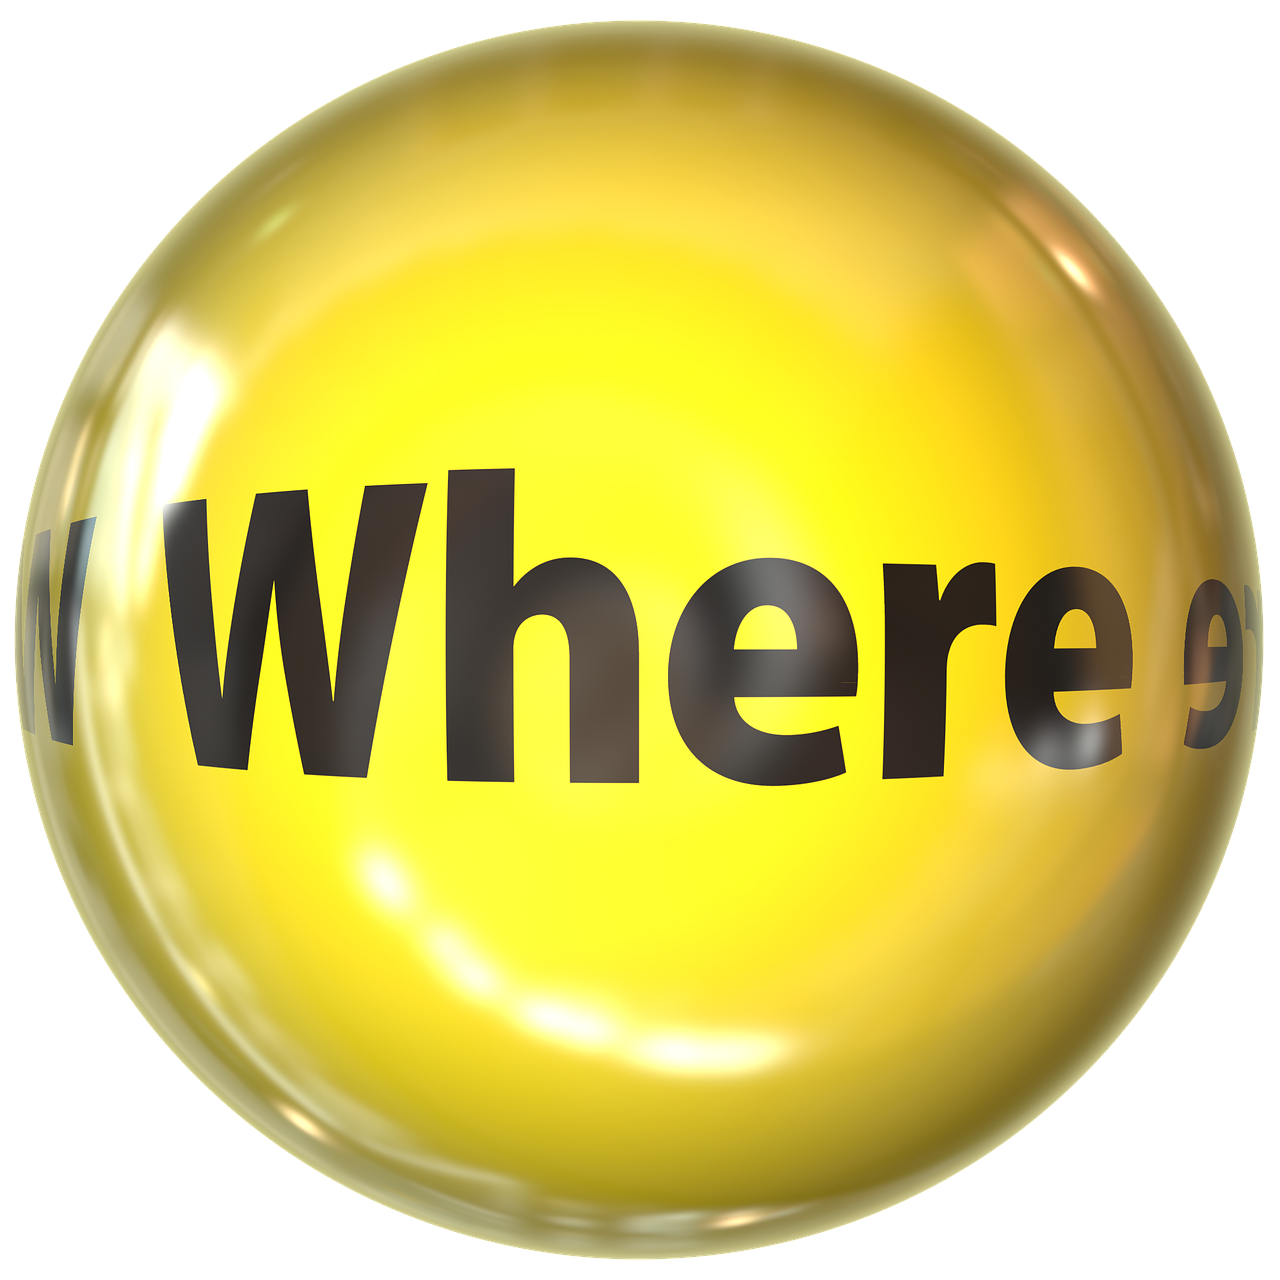 a yellow ball with the word where on it, a picture, happening, graphics $ 9 9 call now, worlds within worlds, gold, directions